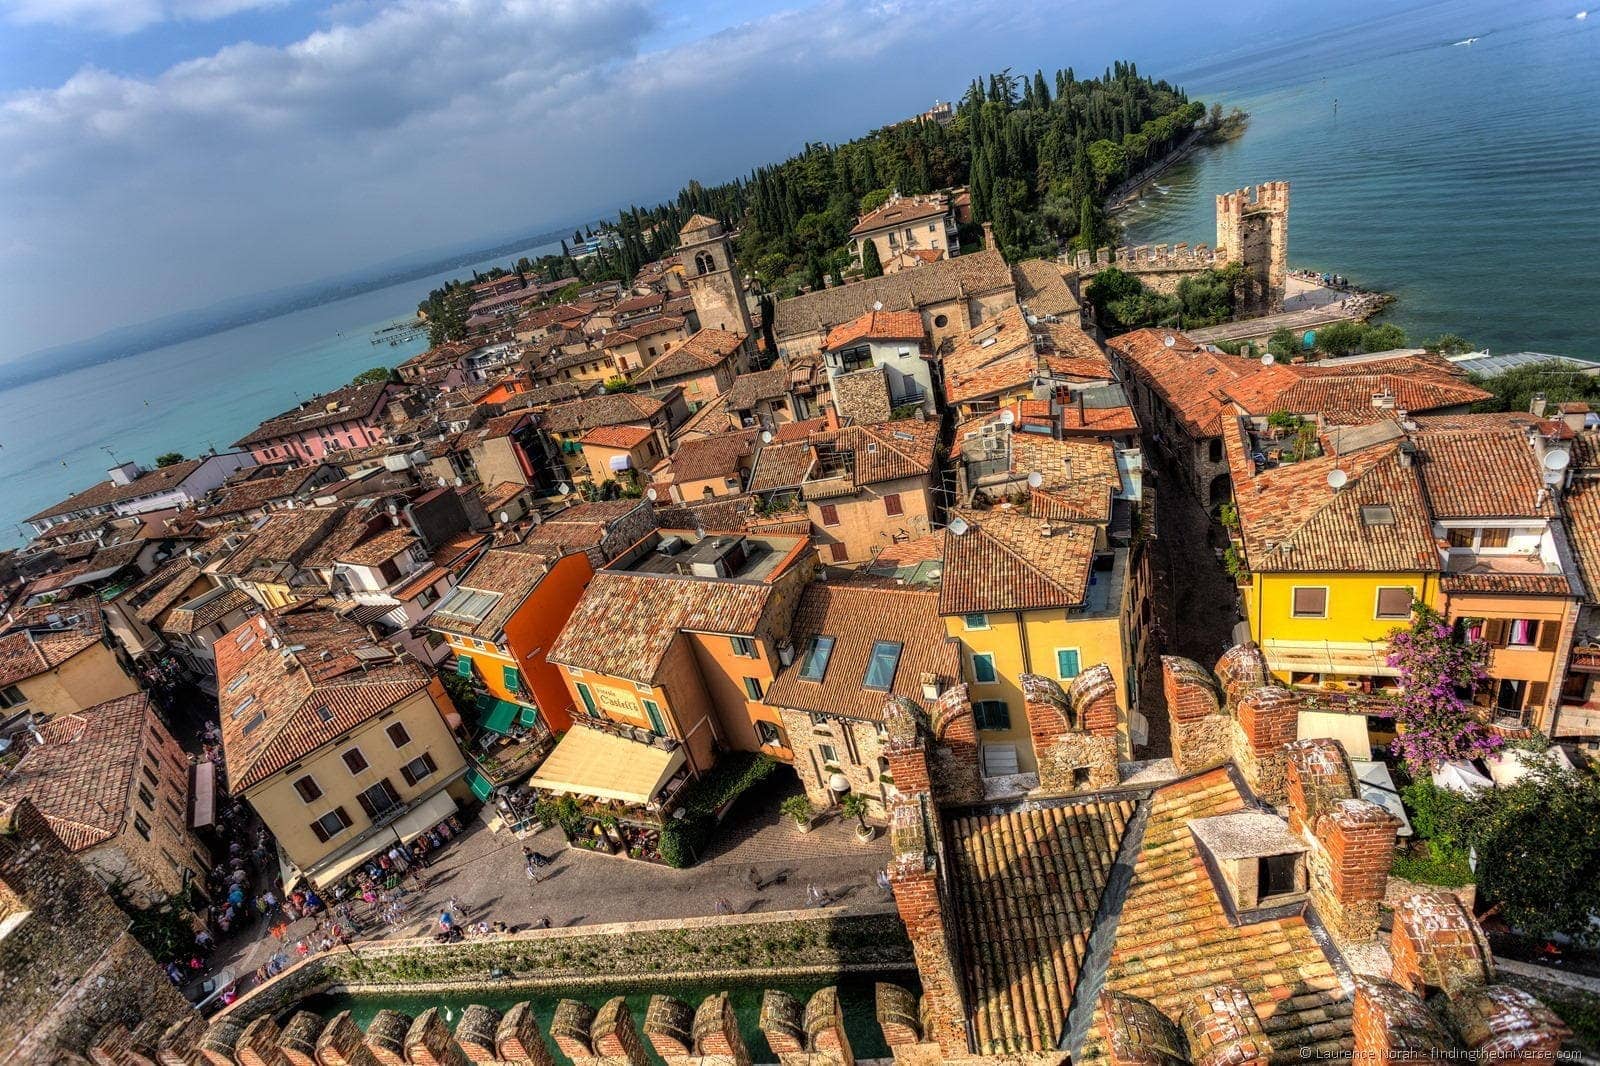 sirmione252520view252520from252520castle252520ramparts252520italy252520garda252520lake25255B325255D